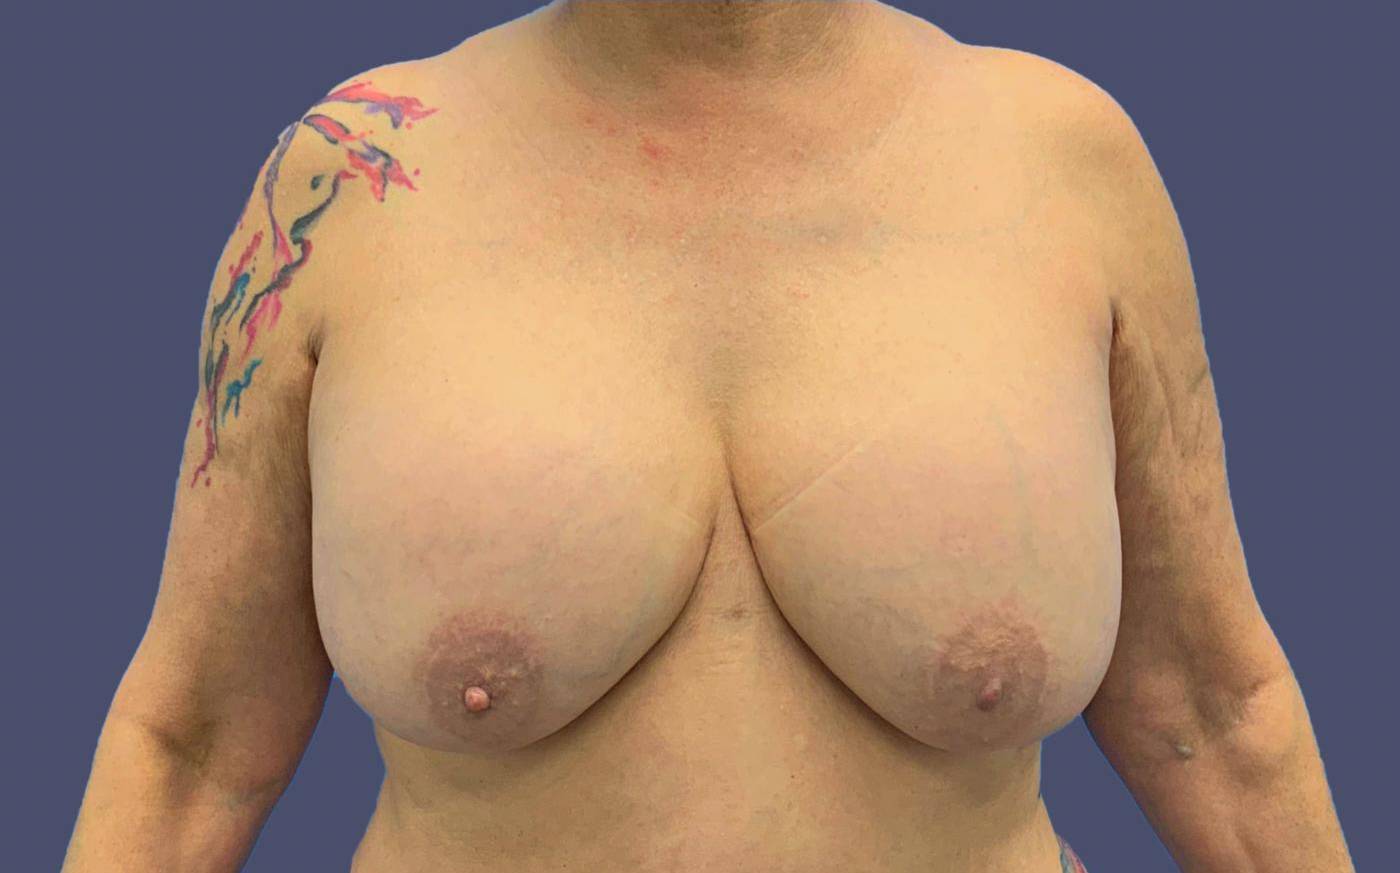 Breast Lift 4 Before